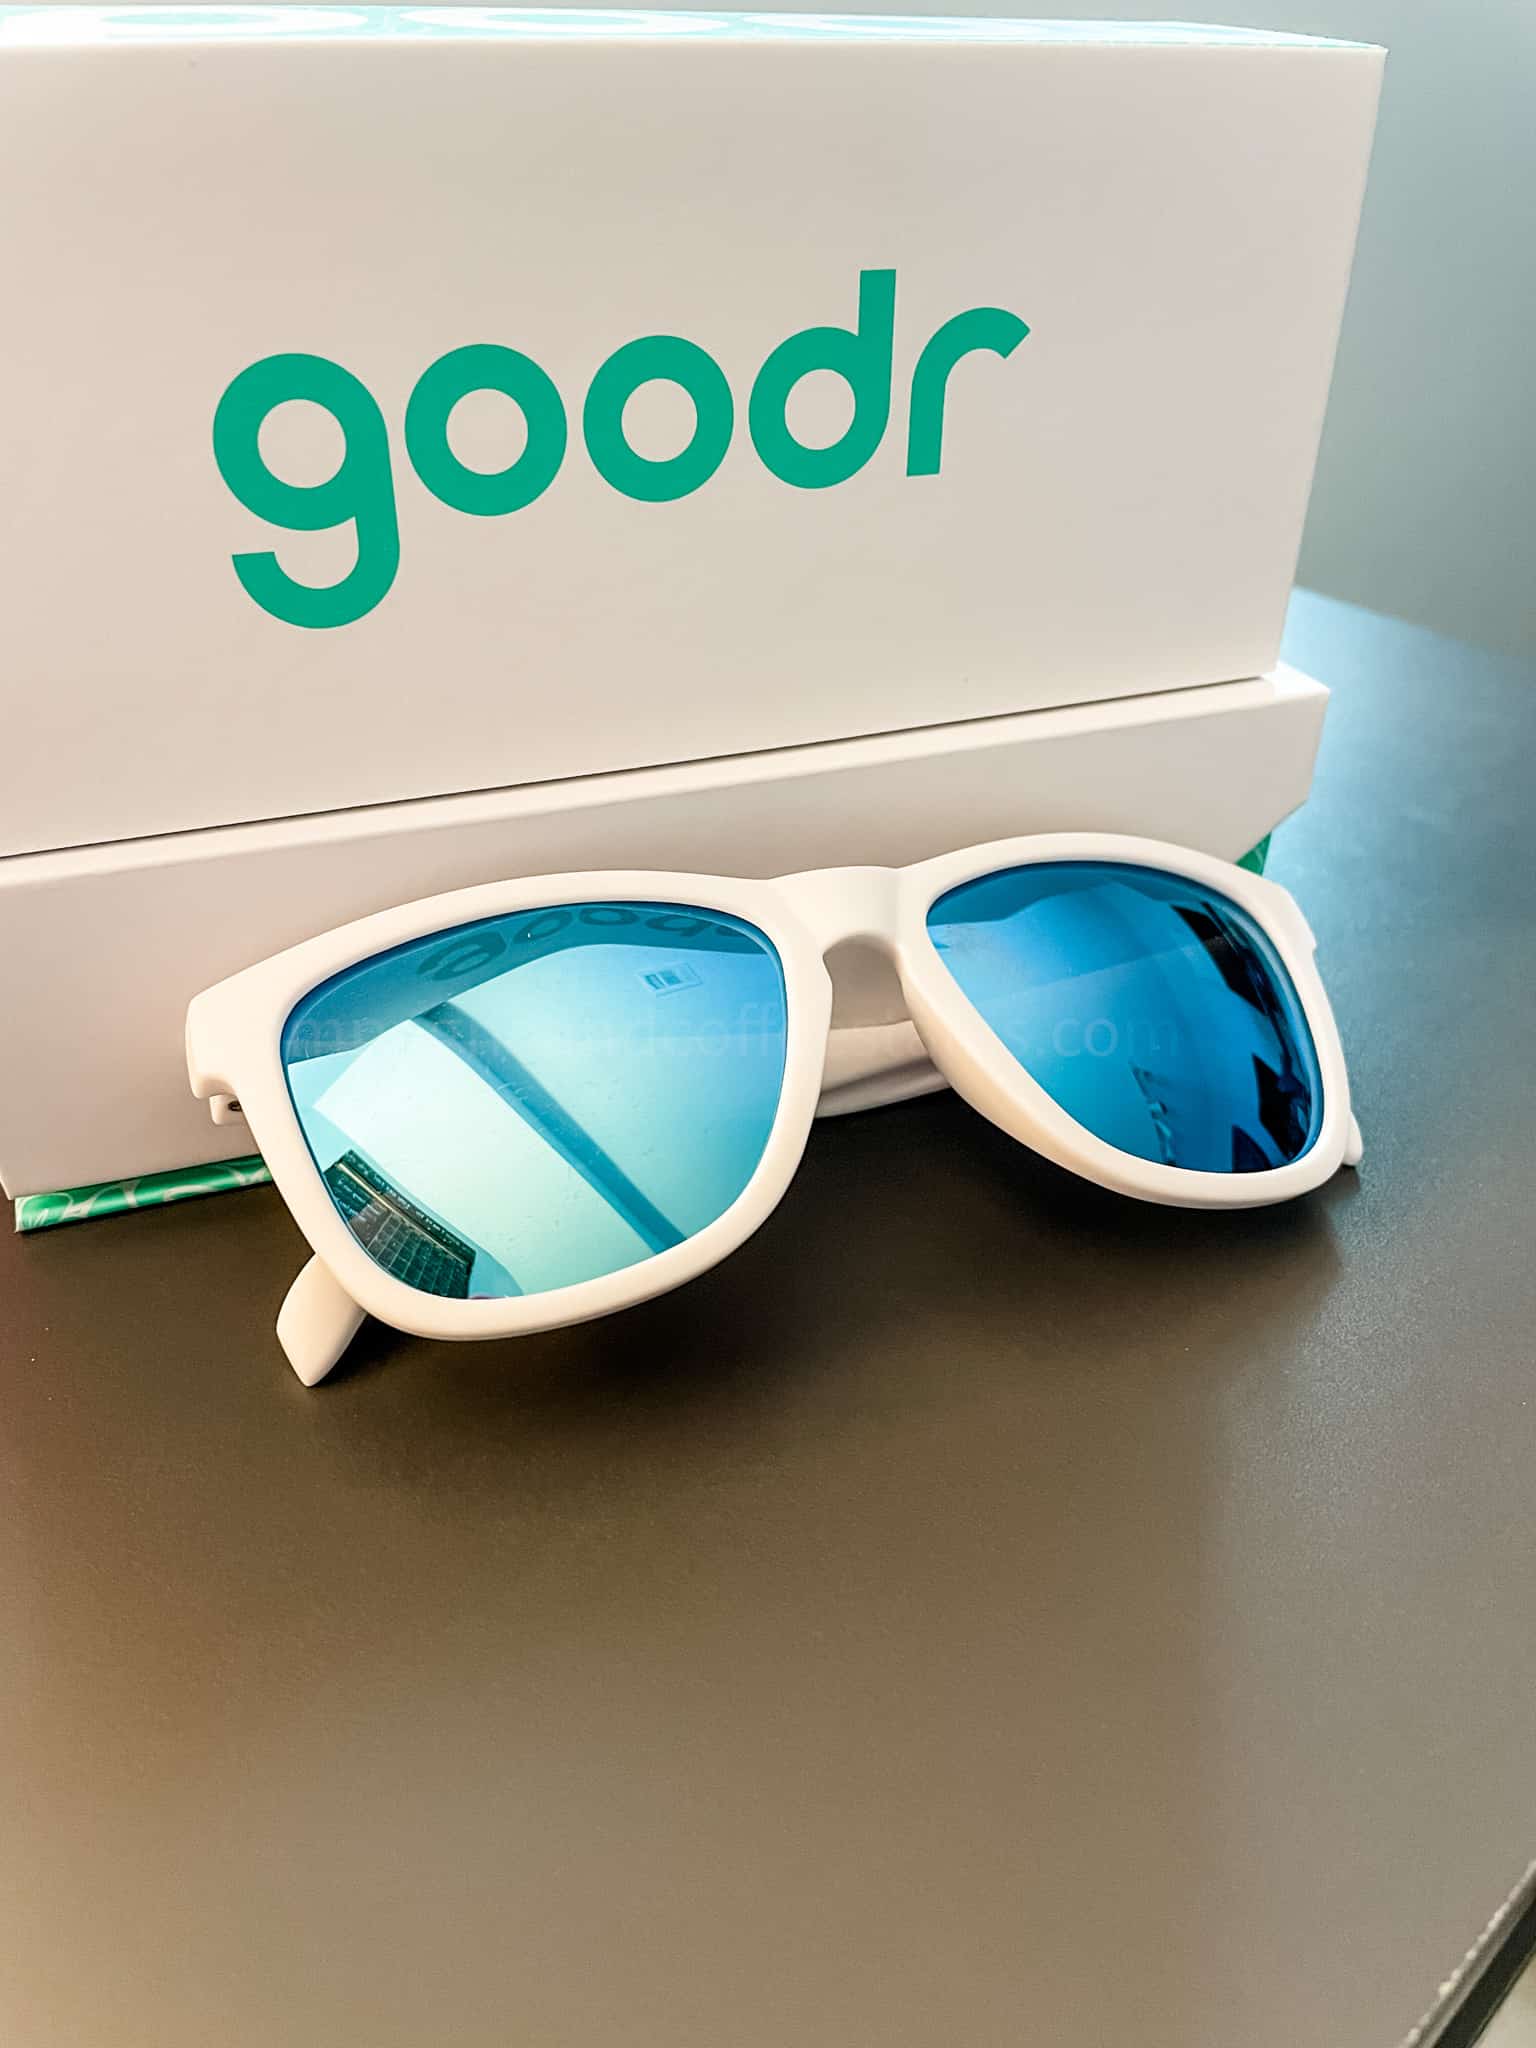 white goodr sunglasses in front of box